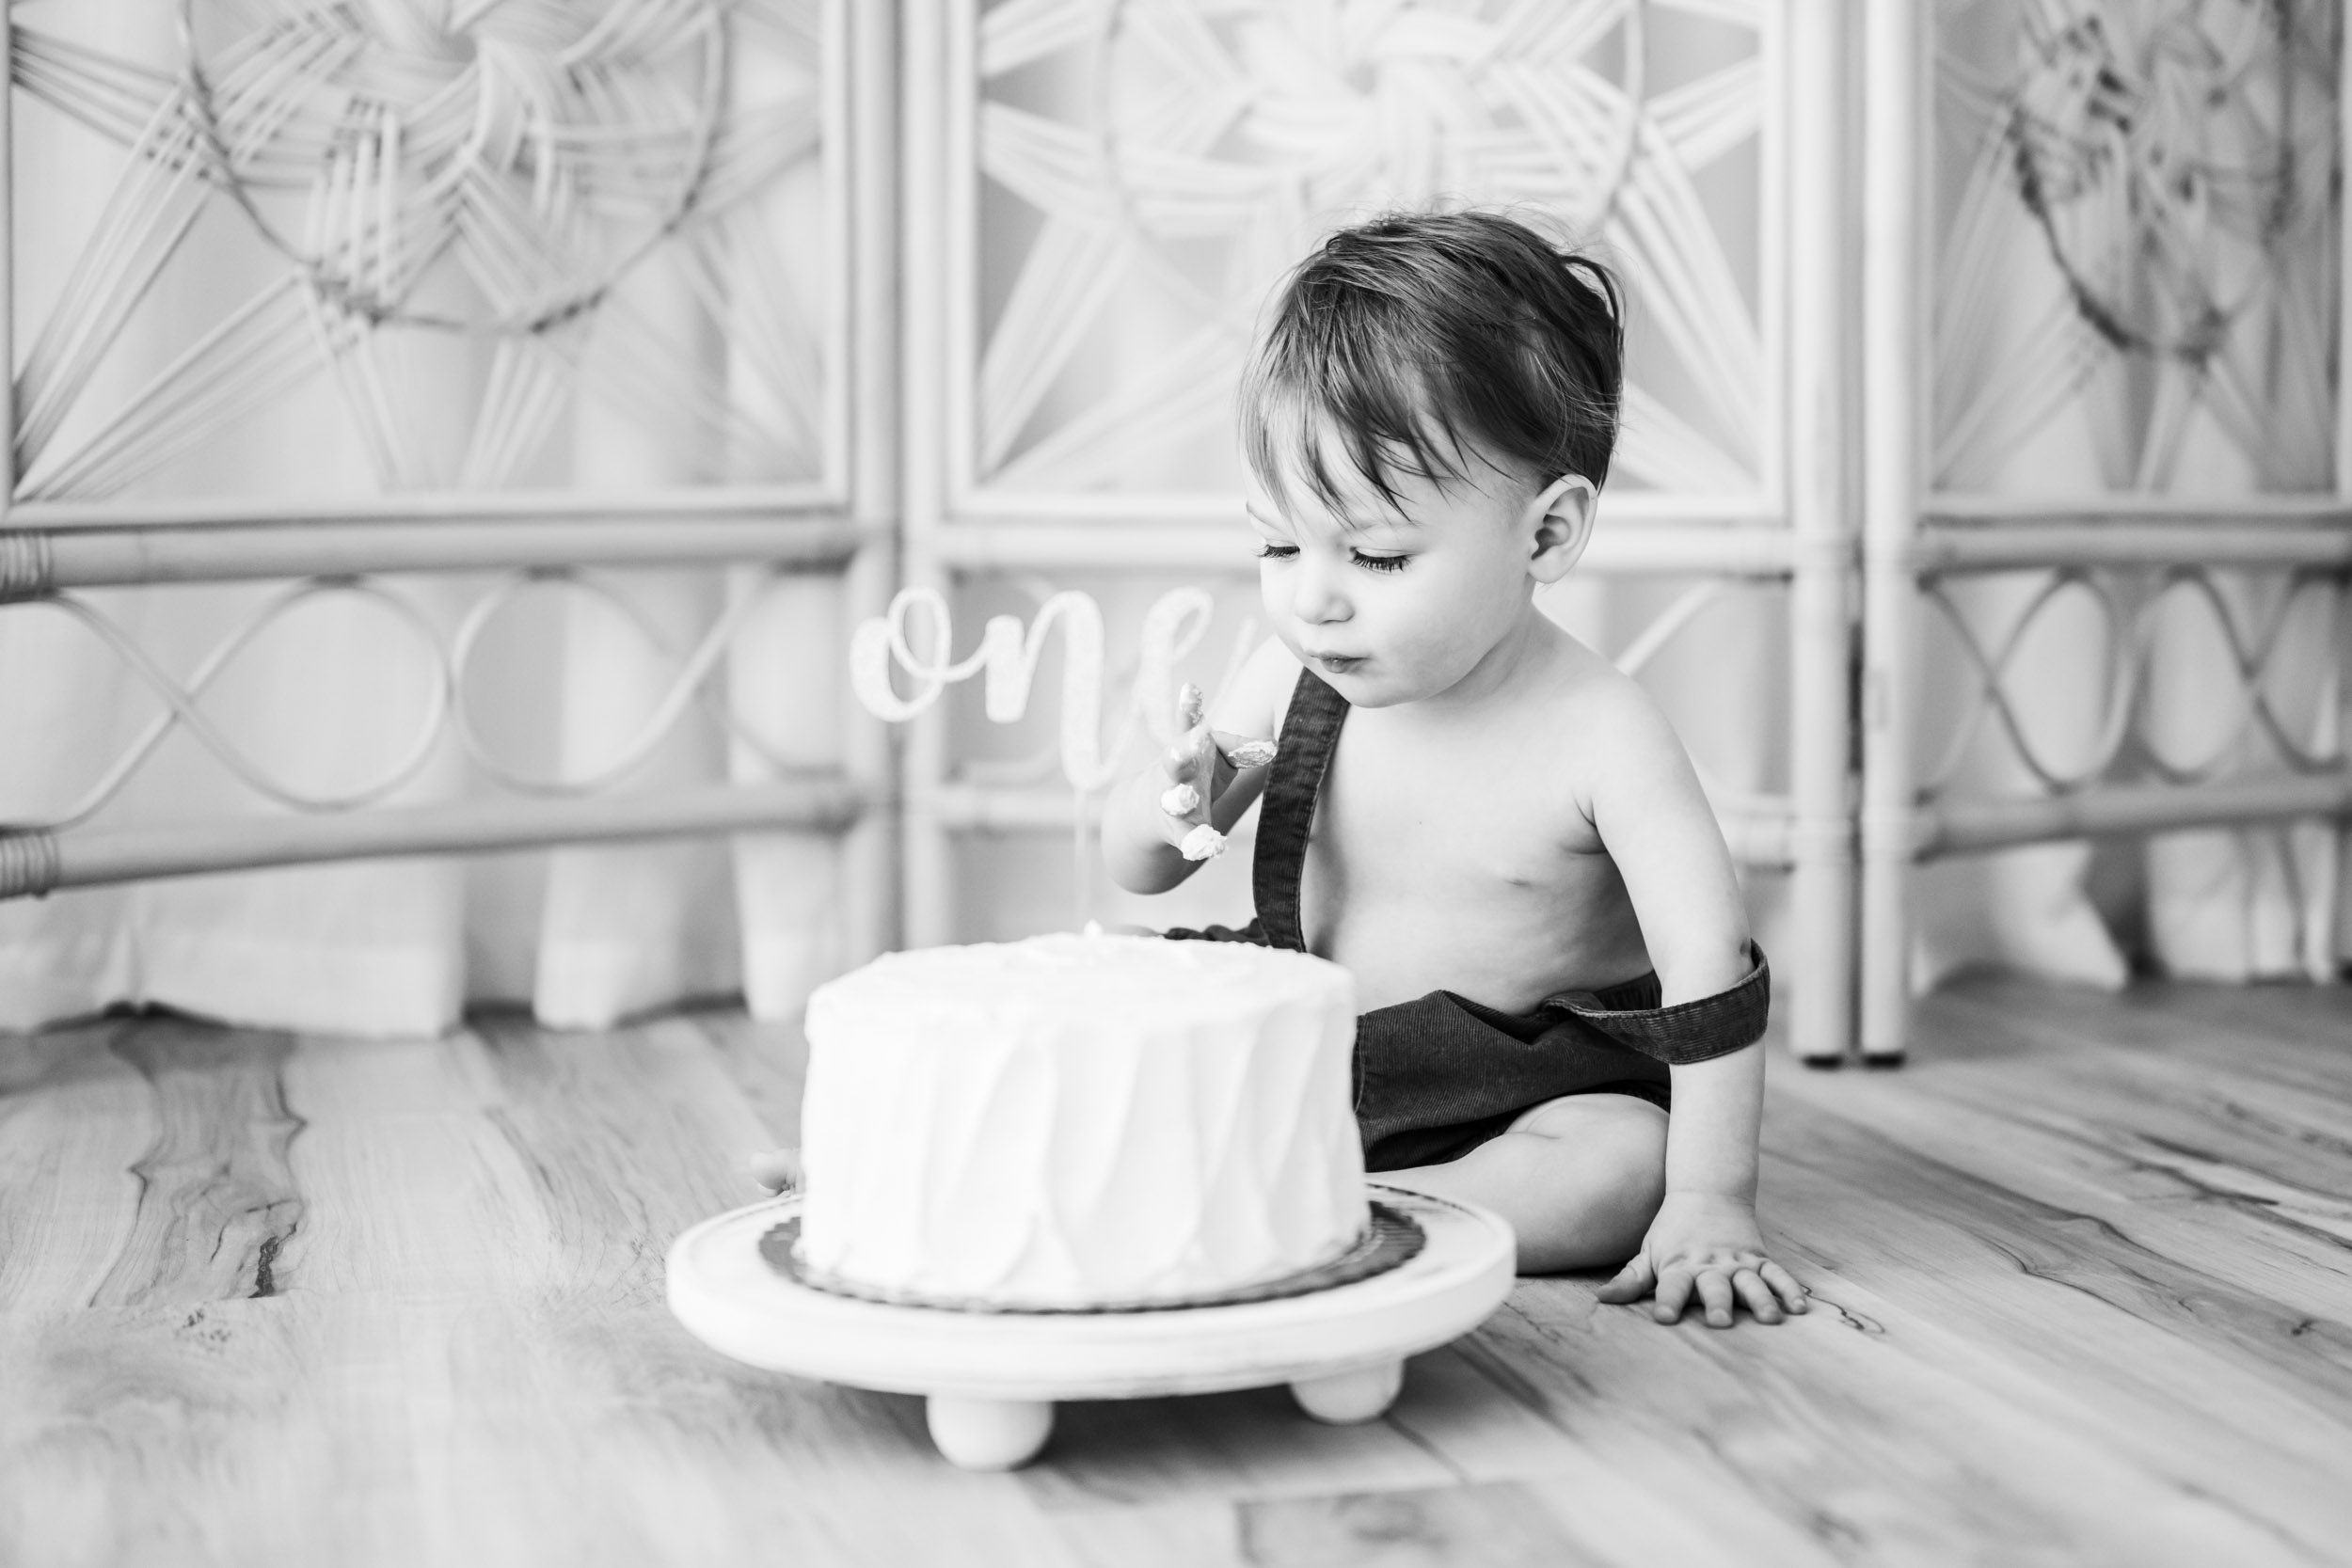 a black and white picture of a young boy sitting on the floor next to a white cake and looking down at his fingers after putting his whole hand in the cake during a 1st birthday cake smash & splash photoshoot